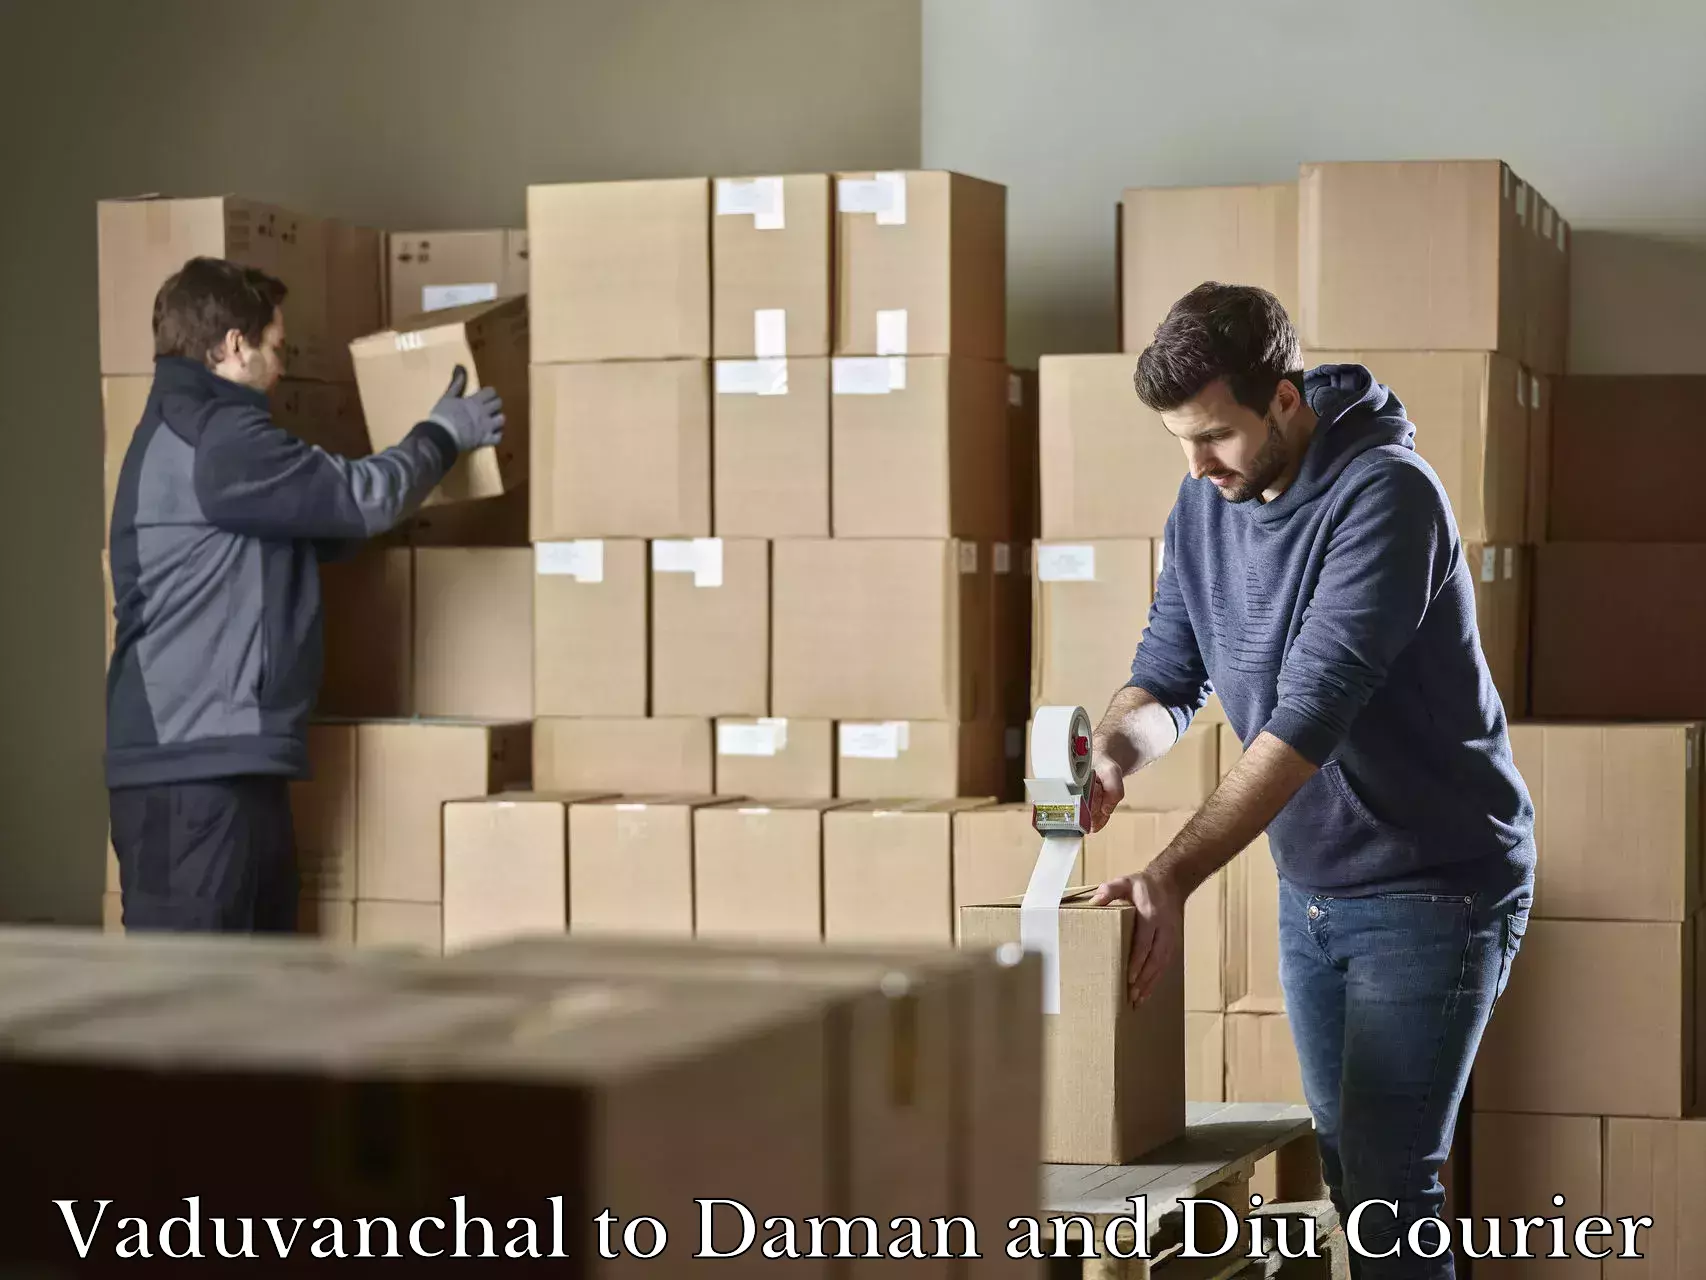 Luggage shipment specialists Vaduvanchal to Daman and Diu